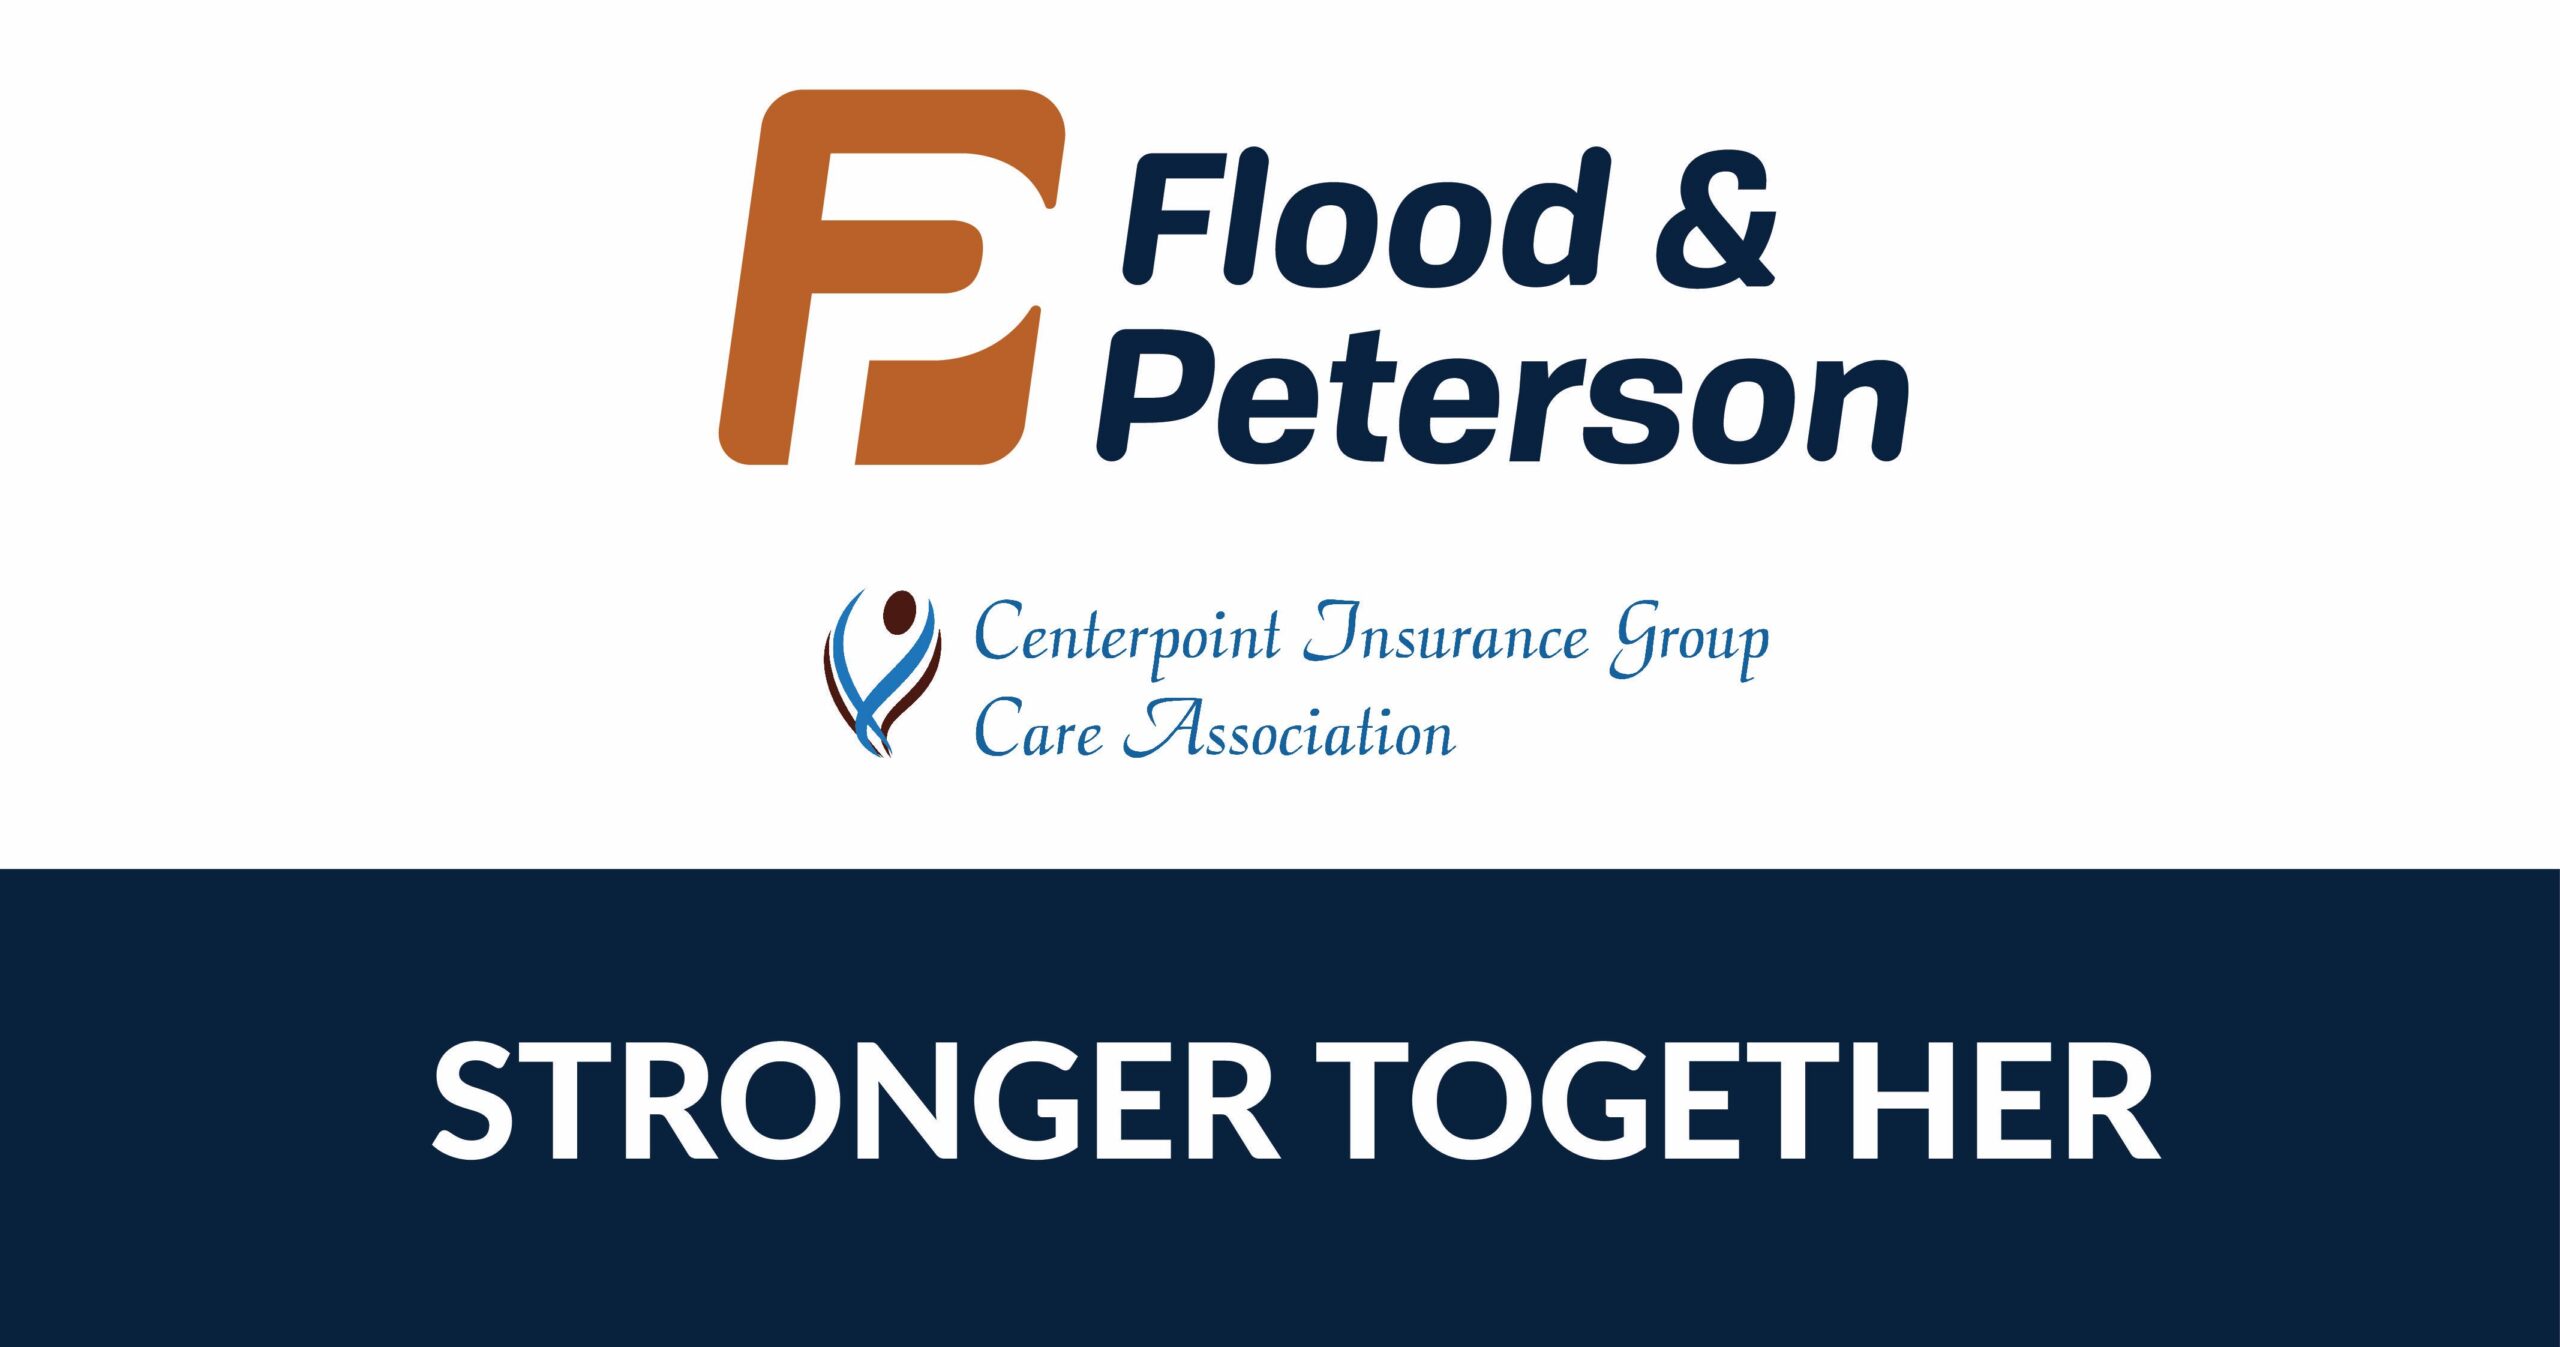 Centerpoint Insurance Group is Now a Part of Flood and Peterson